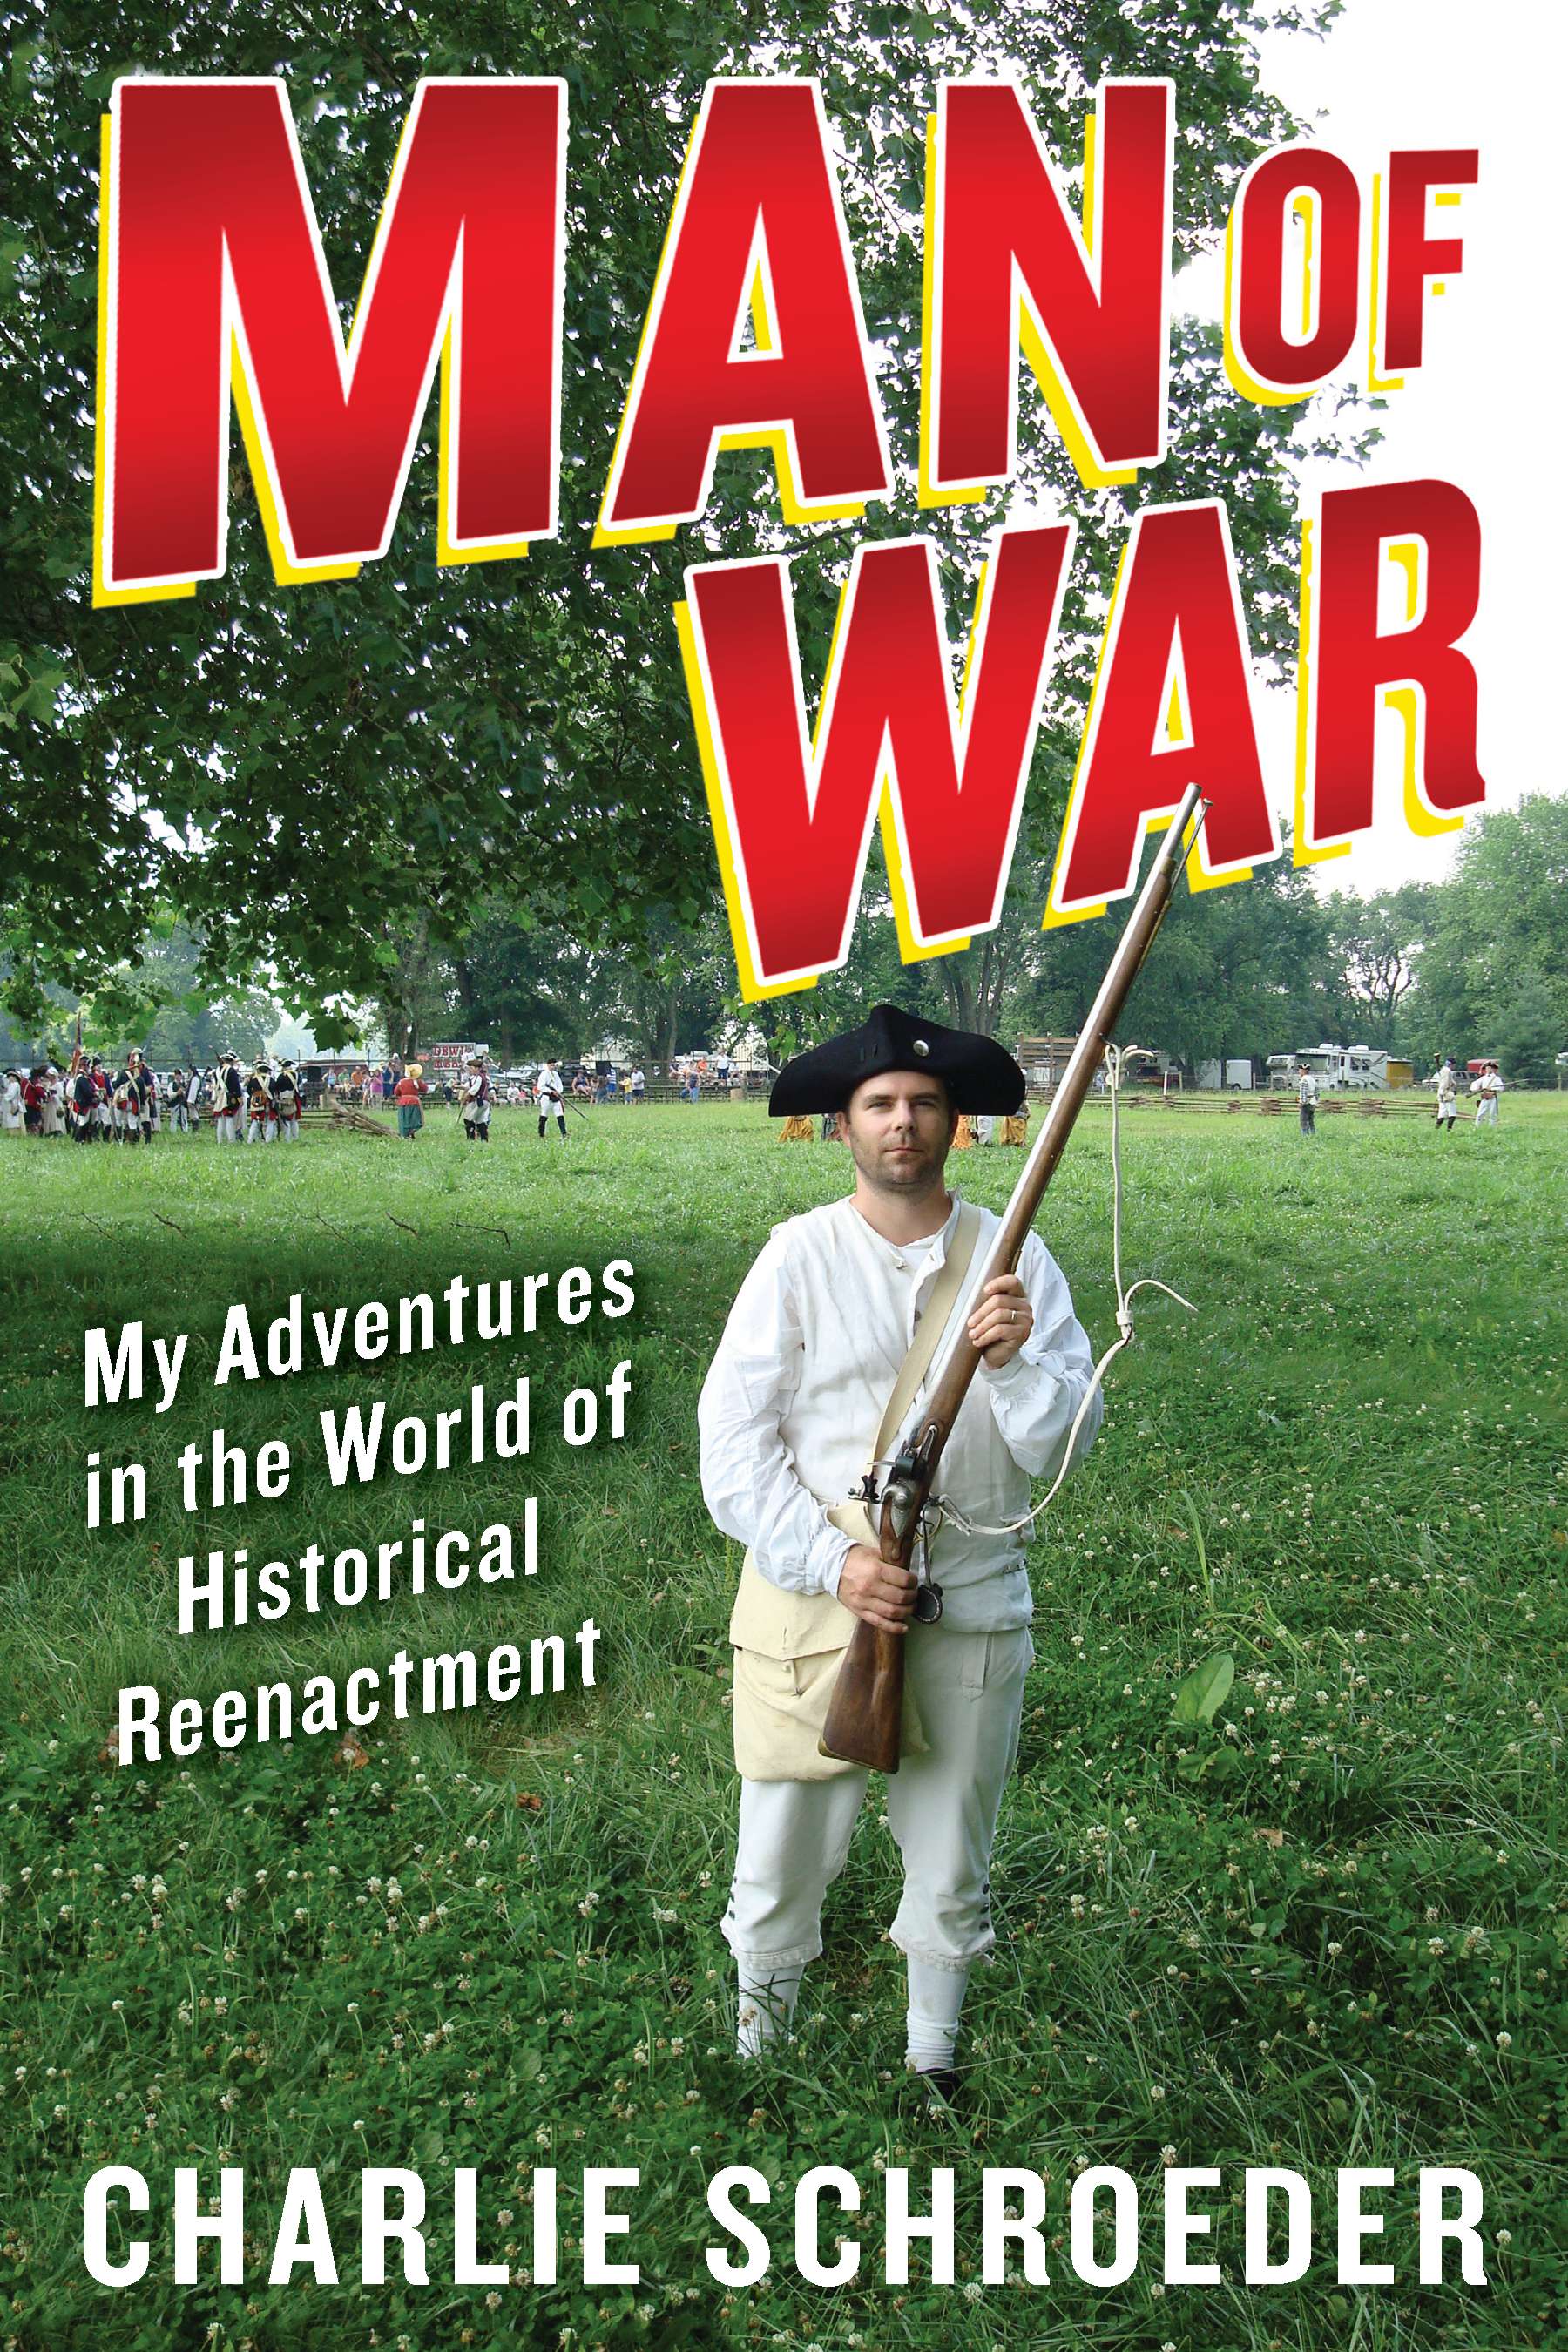 Charlie Schroeder '95 has penned Man of War: My Adventures in the World of Historical Reenactment.